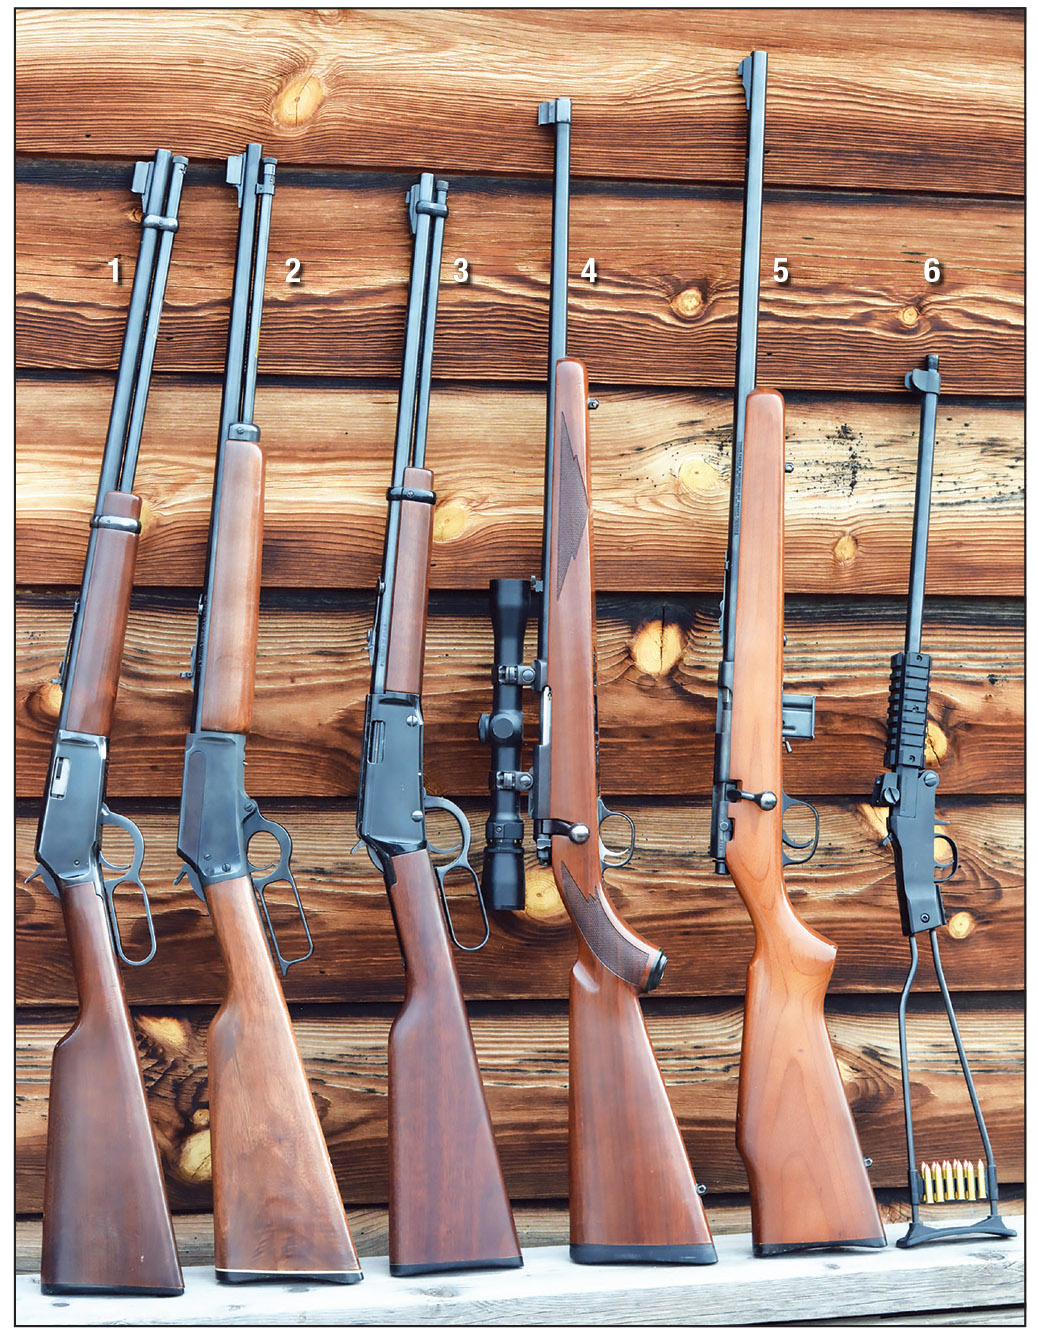 The 22 Magnum has been offered in many different rifles. A few examples include: (1) Winchester 9422M, (2) Marlin 1894M, (3) Henry Lever Action H001M, (4) Ruger 77/22, (5) Marlin 925M and (6) Chiappa Little Badger.